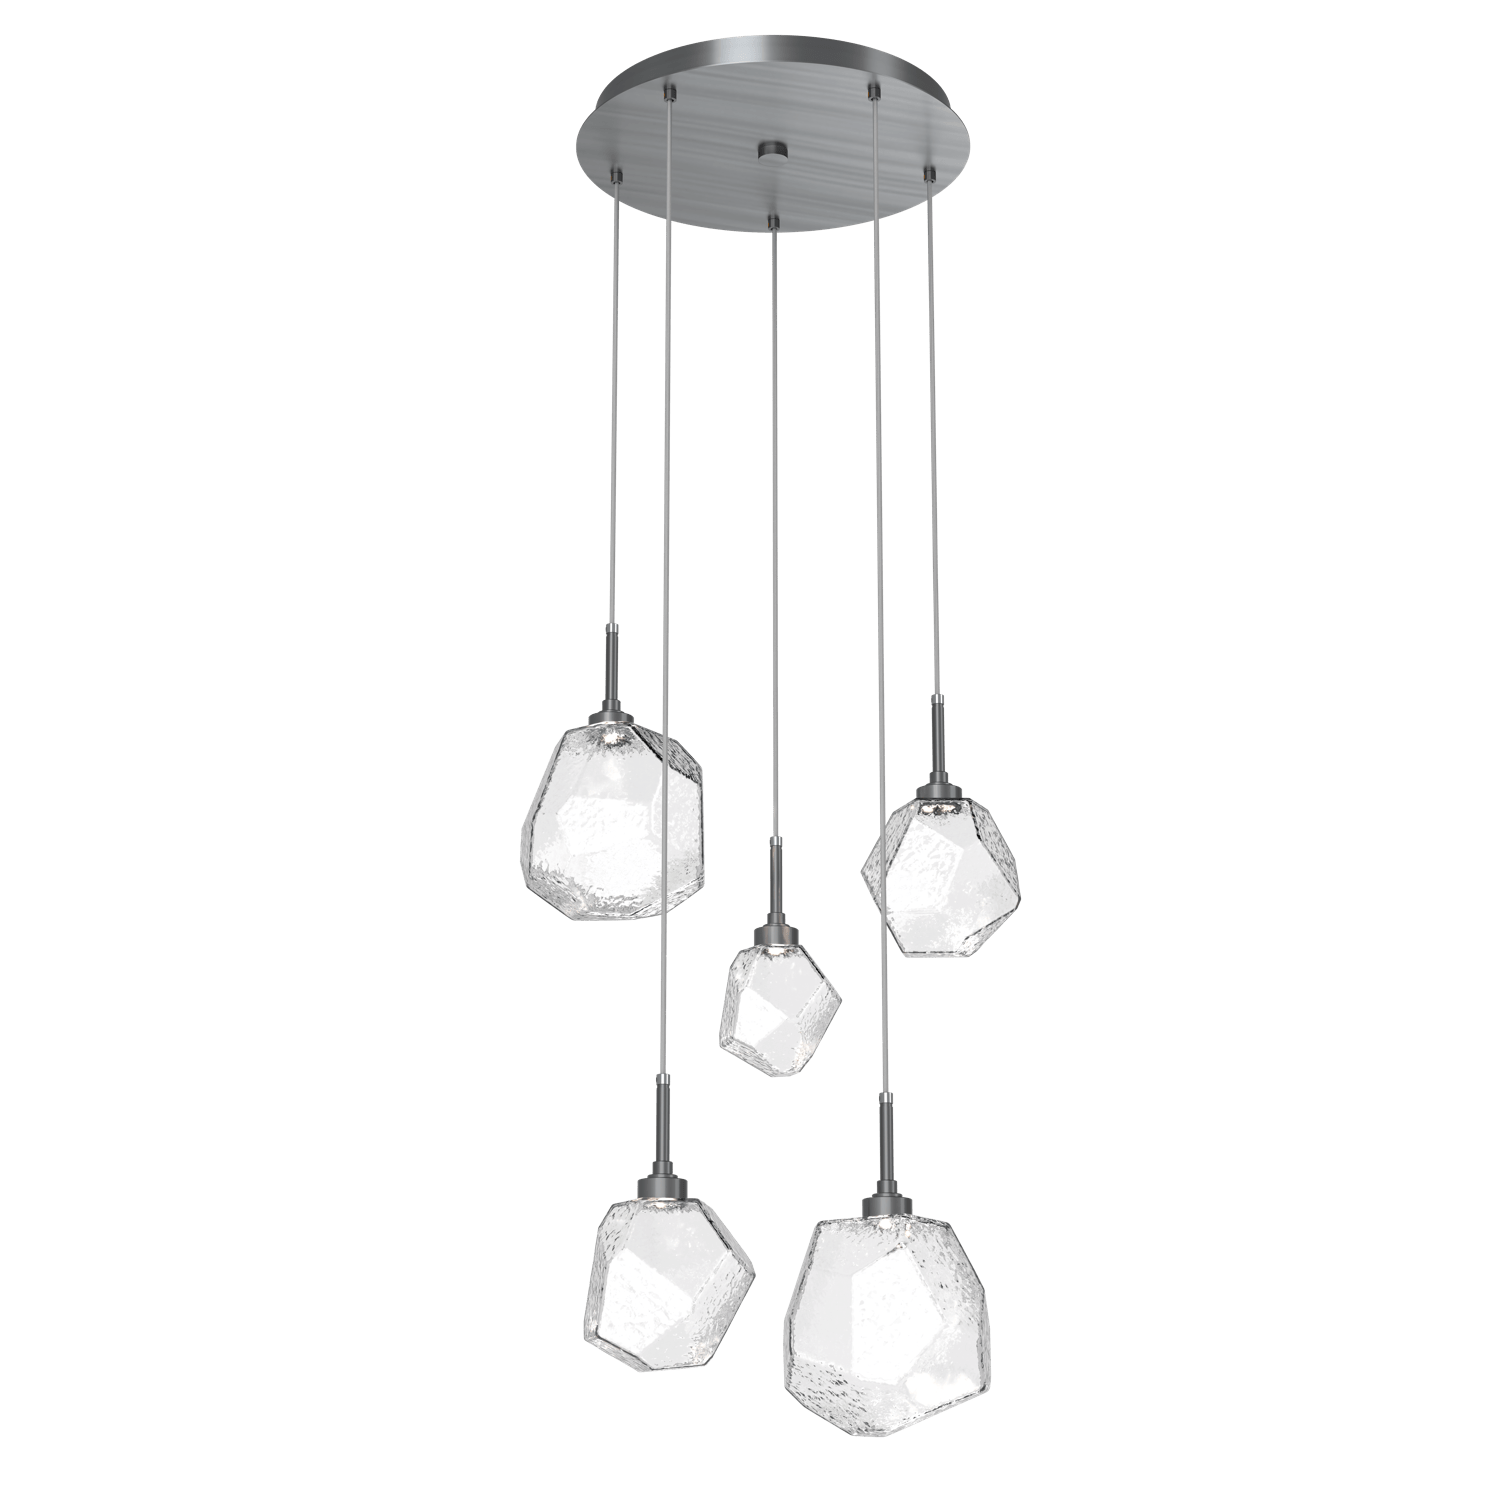 CHB0039-05-GM-C-Hammerton-Studio-Gem-5-light-round-pendant-chandelier-with-gunmetal-finish-and-clear-blown-glass-shades-and-LED-lamping